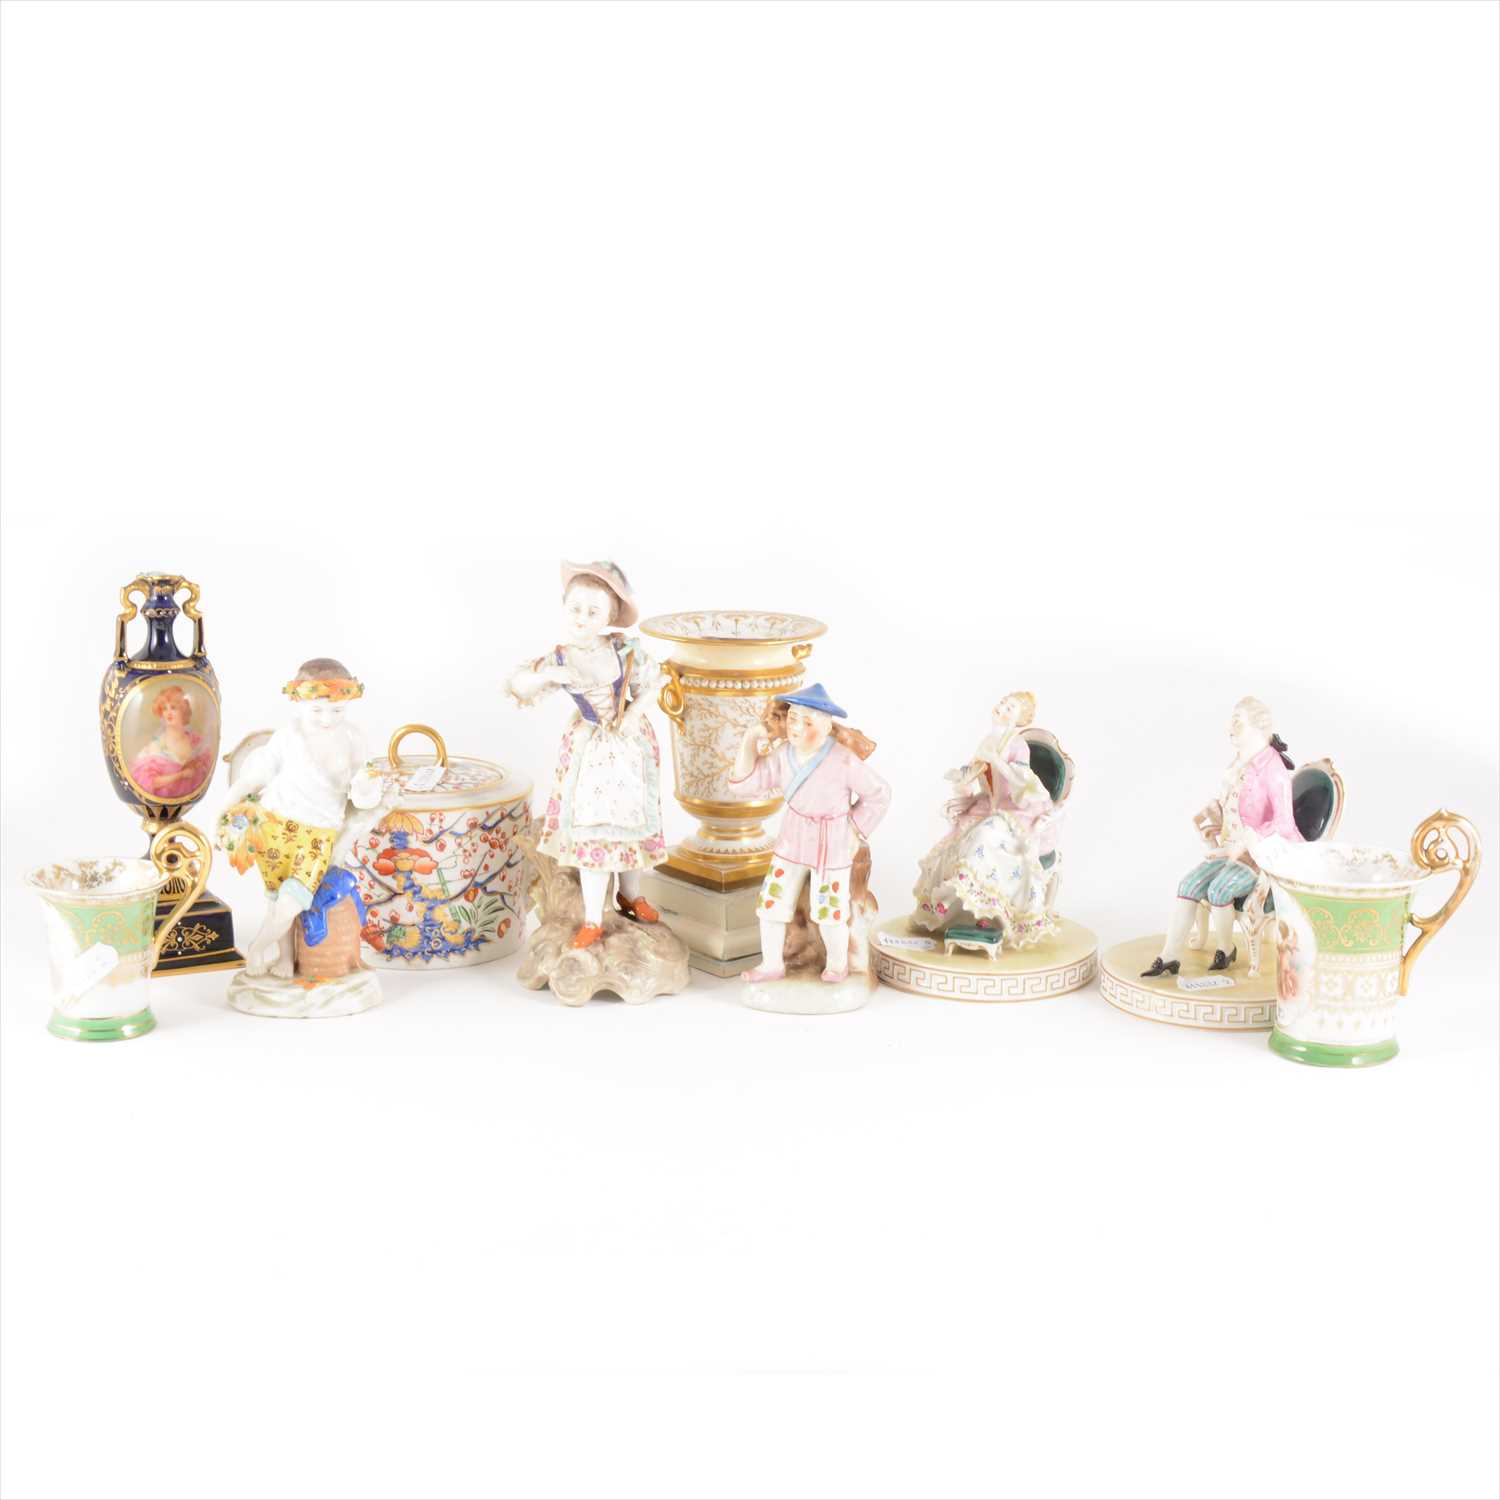 Lot 18 - Assorted English and Continental porcelain figures and vessels